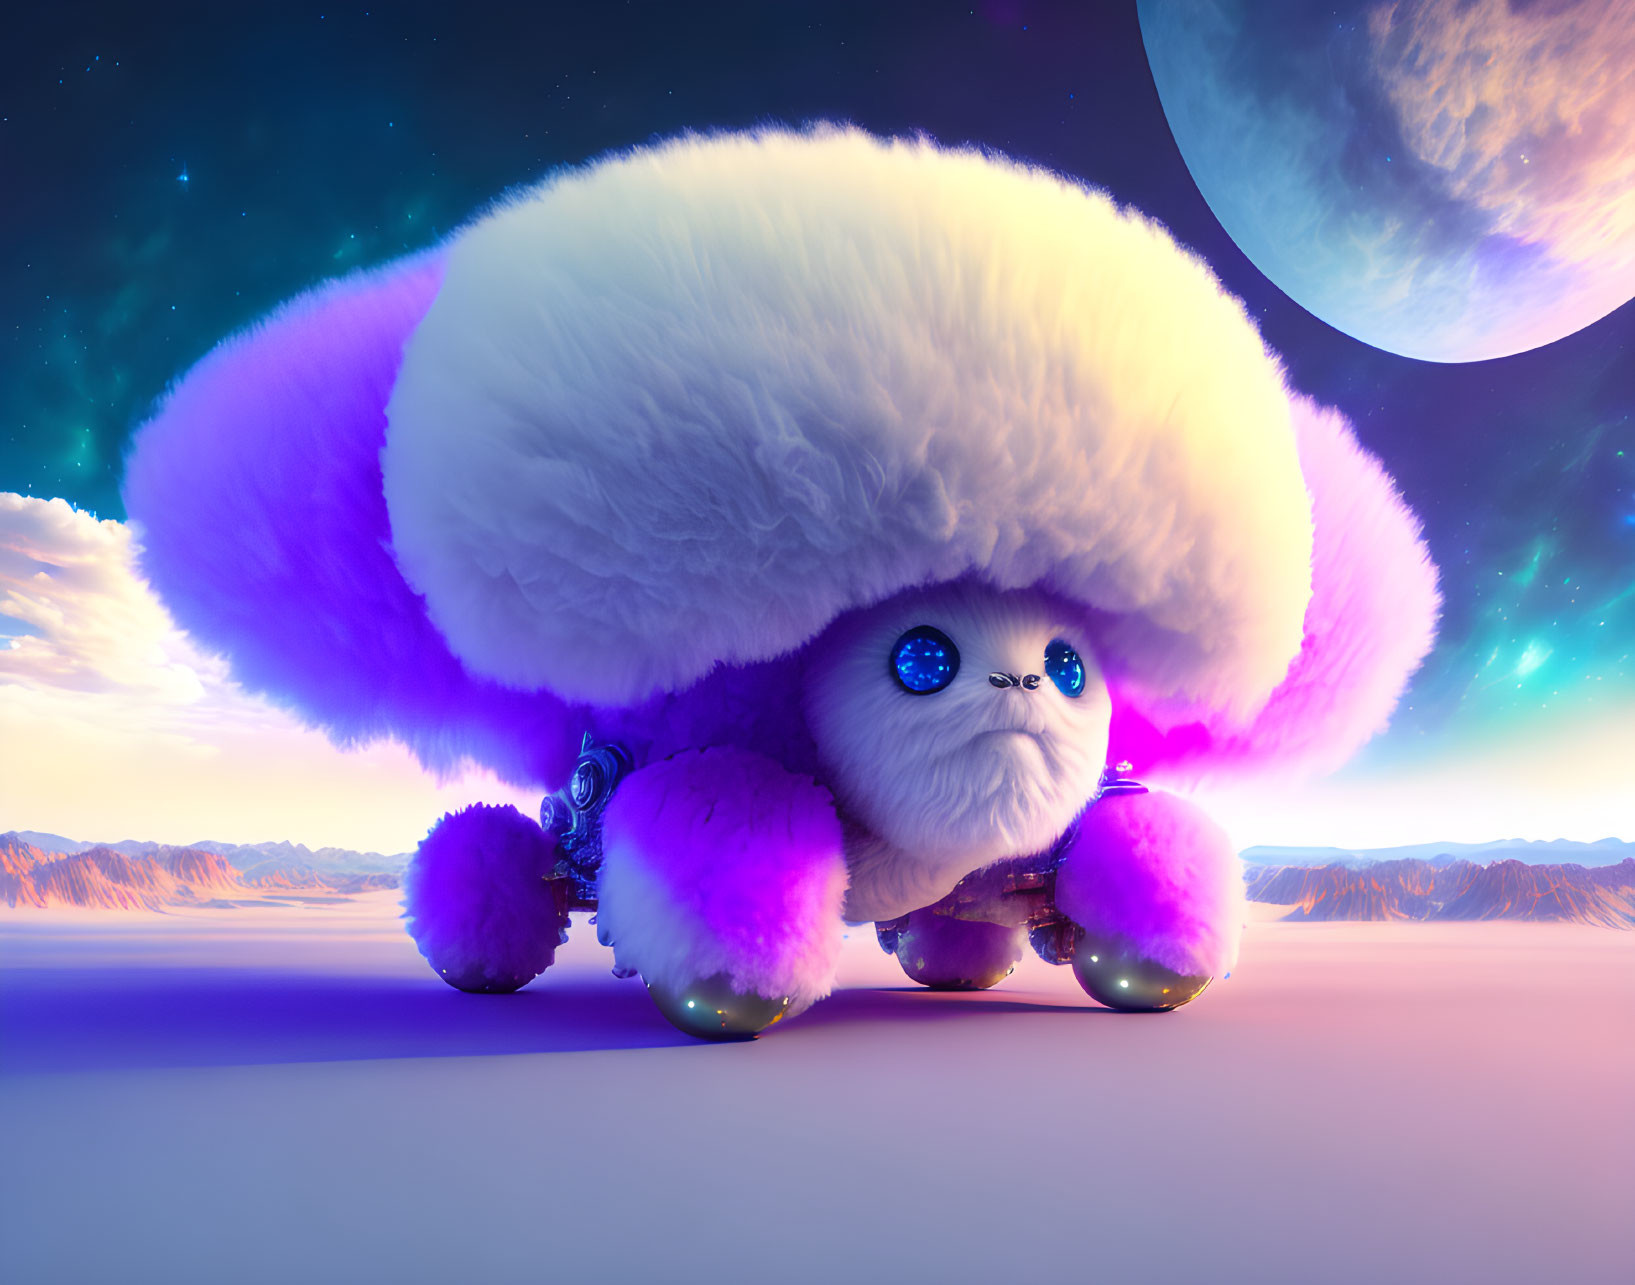 Fluffy White Creature with Blue Eyes and Orb Feet in Alien Landscape